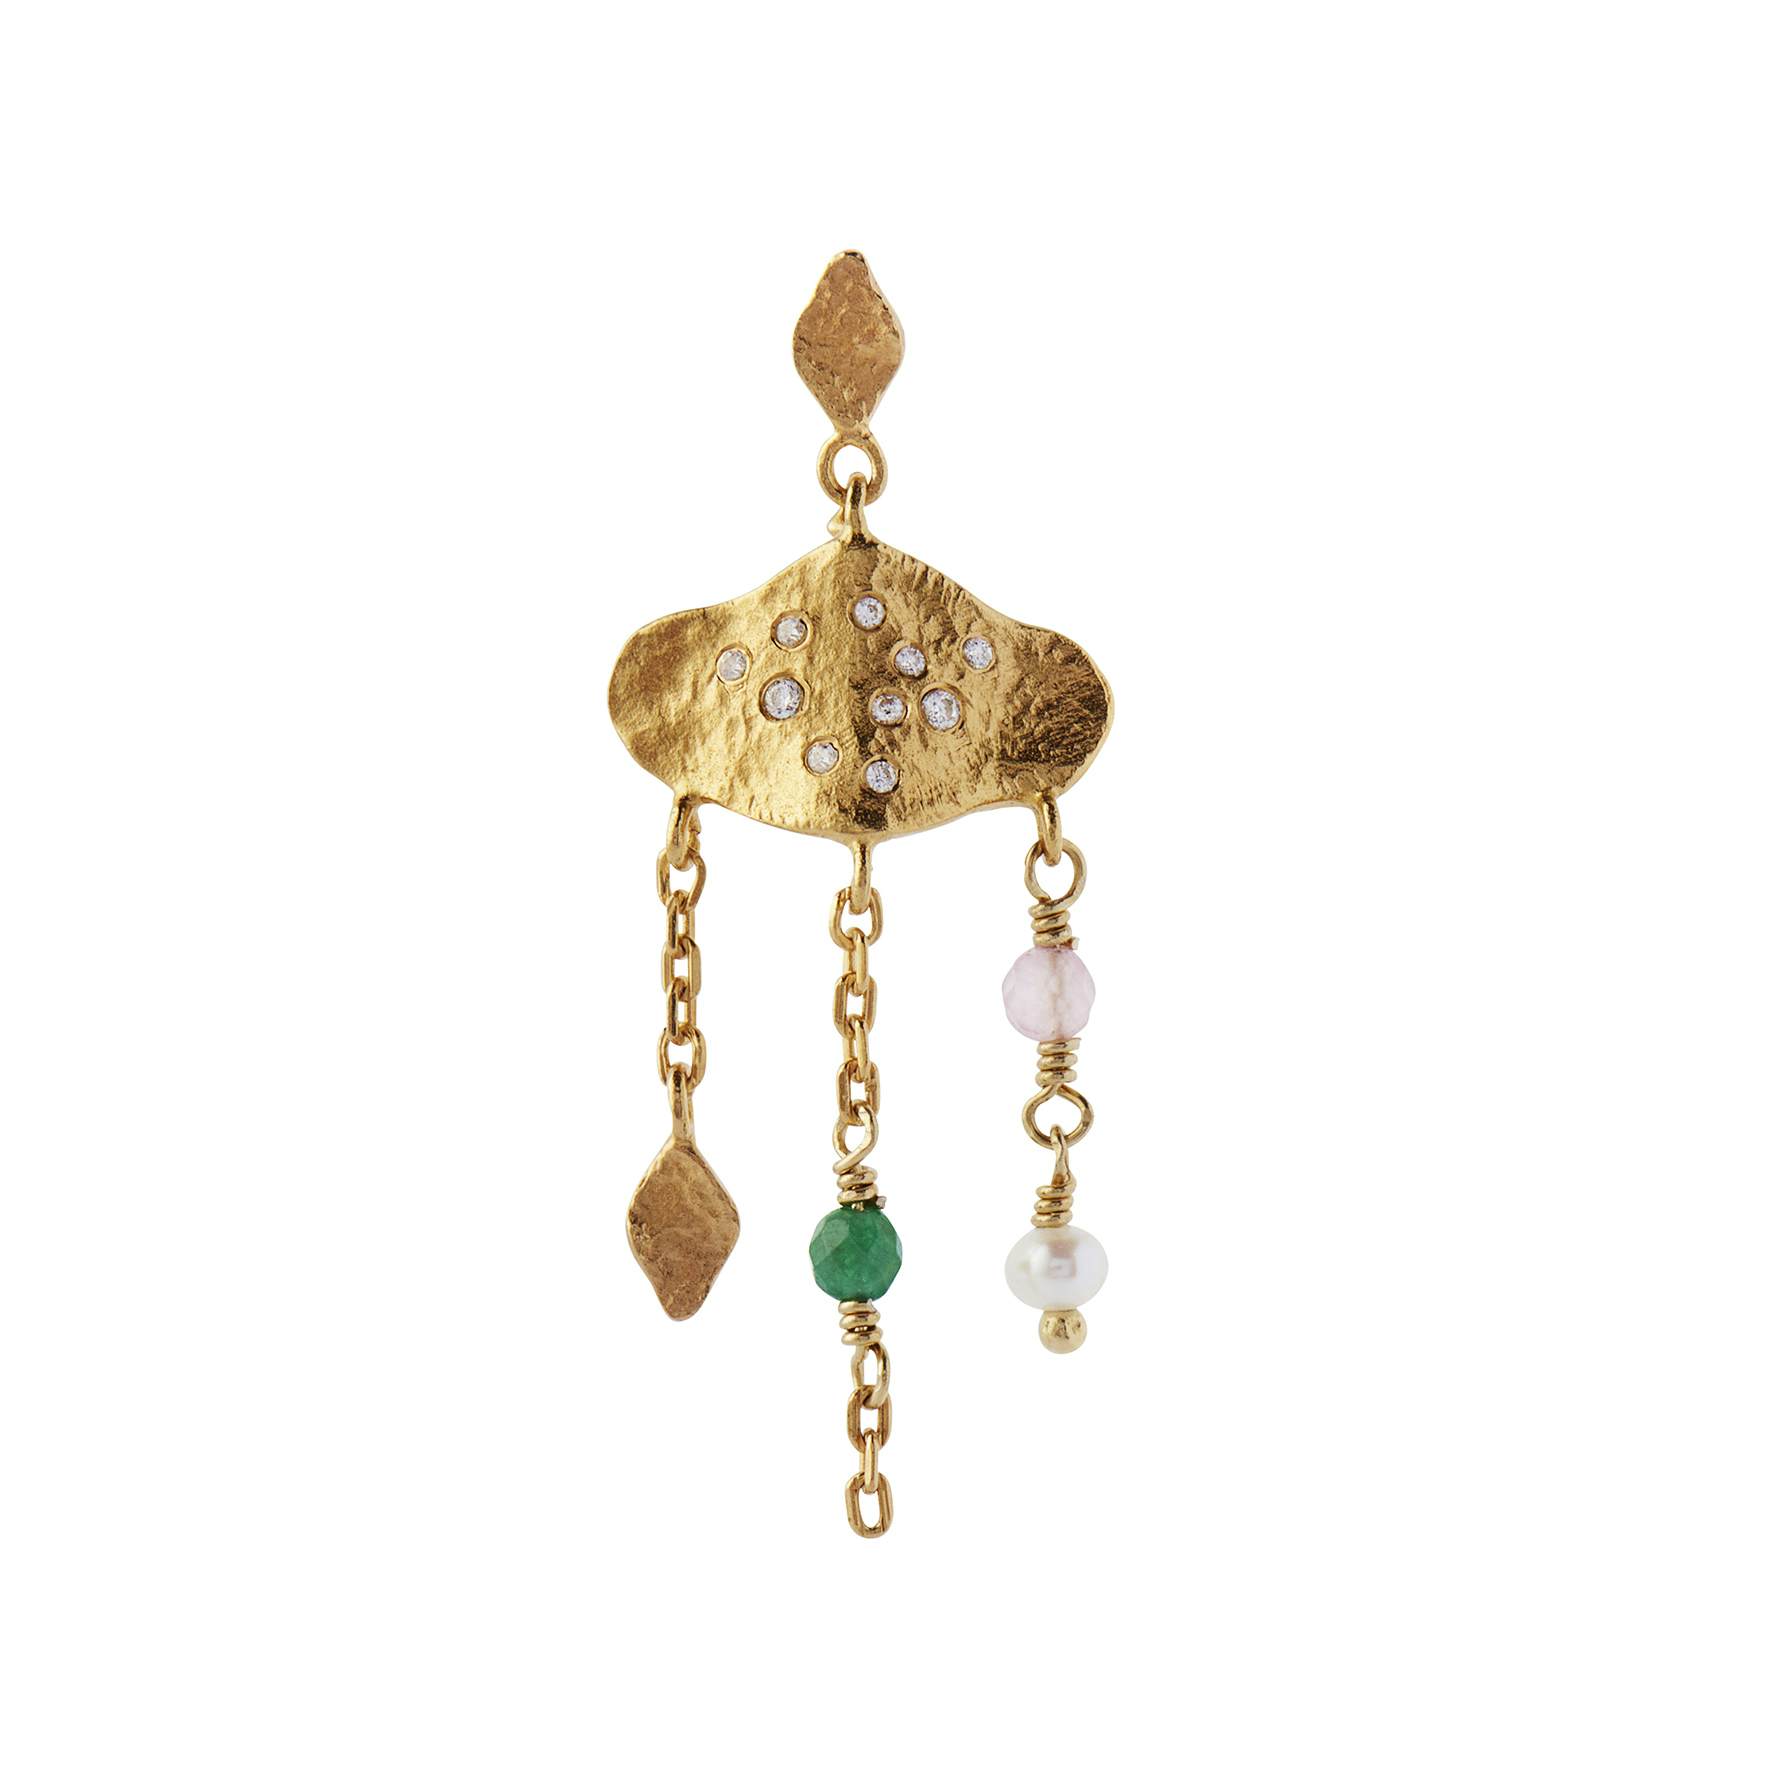 Ile De L'amour With Dancing Stones Earring from STINE A Jewelry in Goldplated-Silver Sterling 925